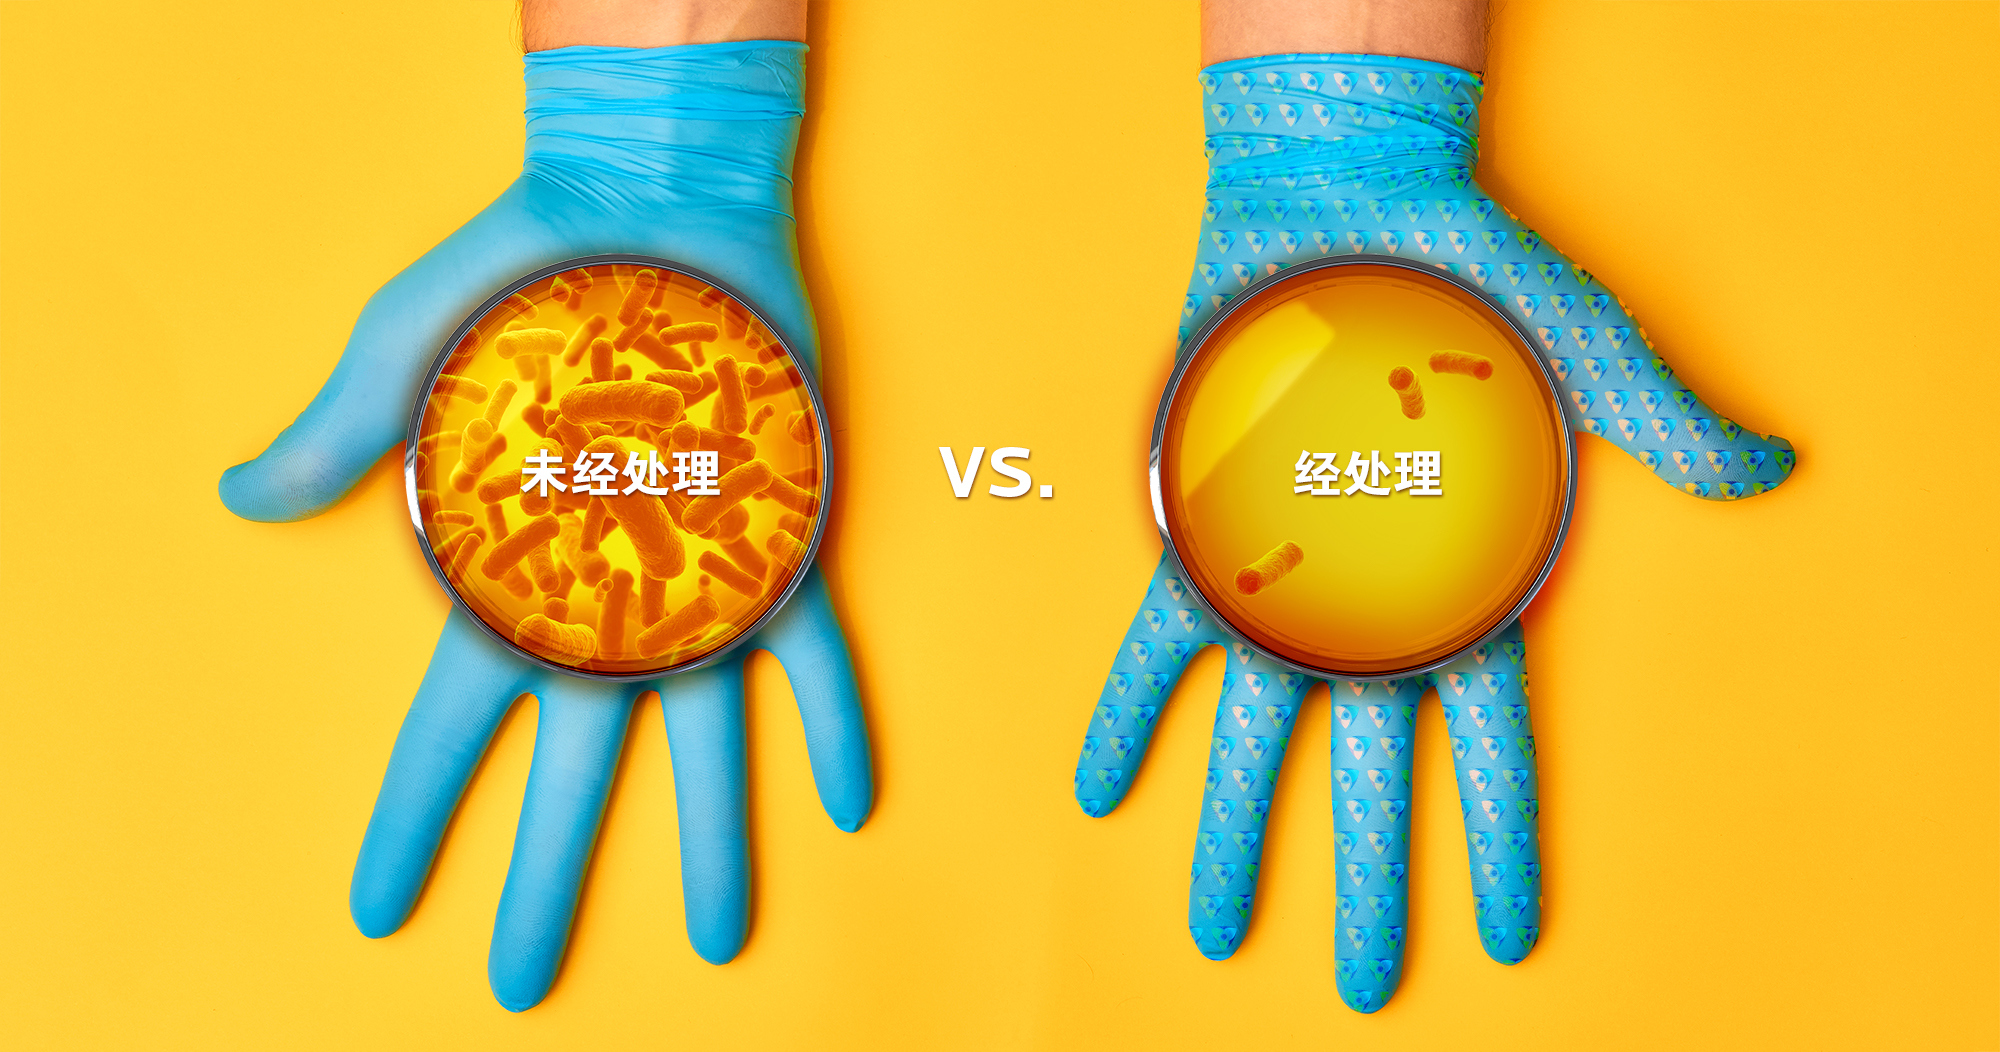 Gloves 2 Hands Treated Vs Untreated Comparison Sc